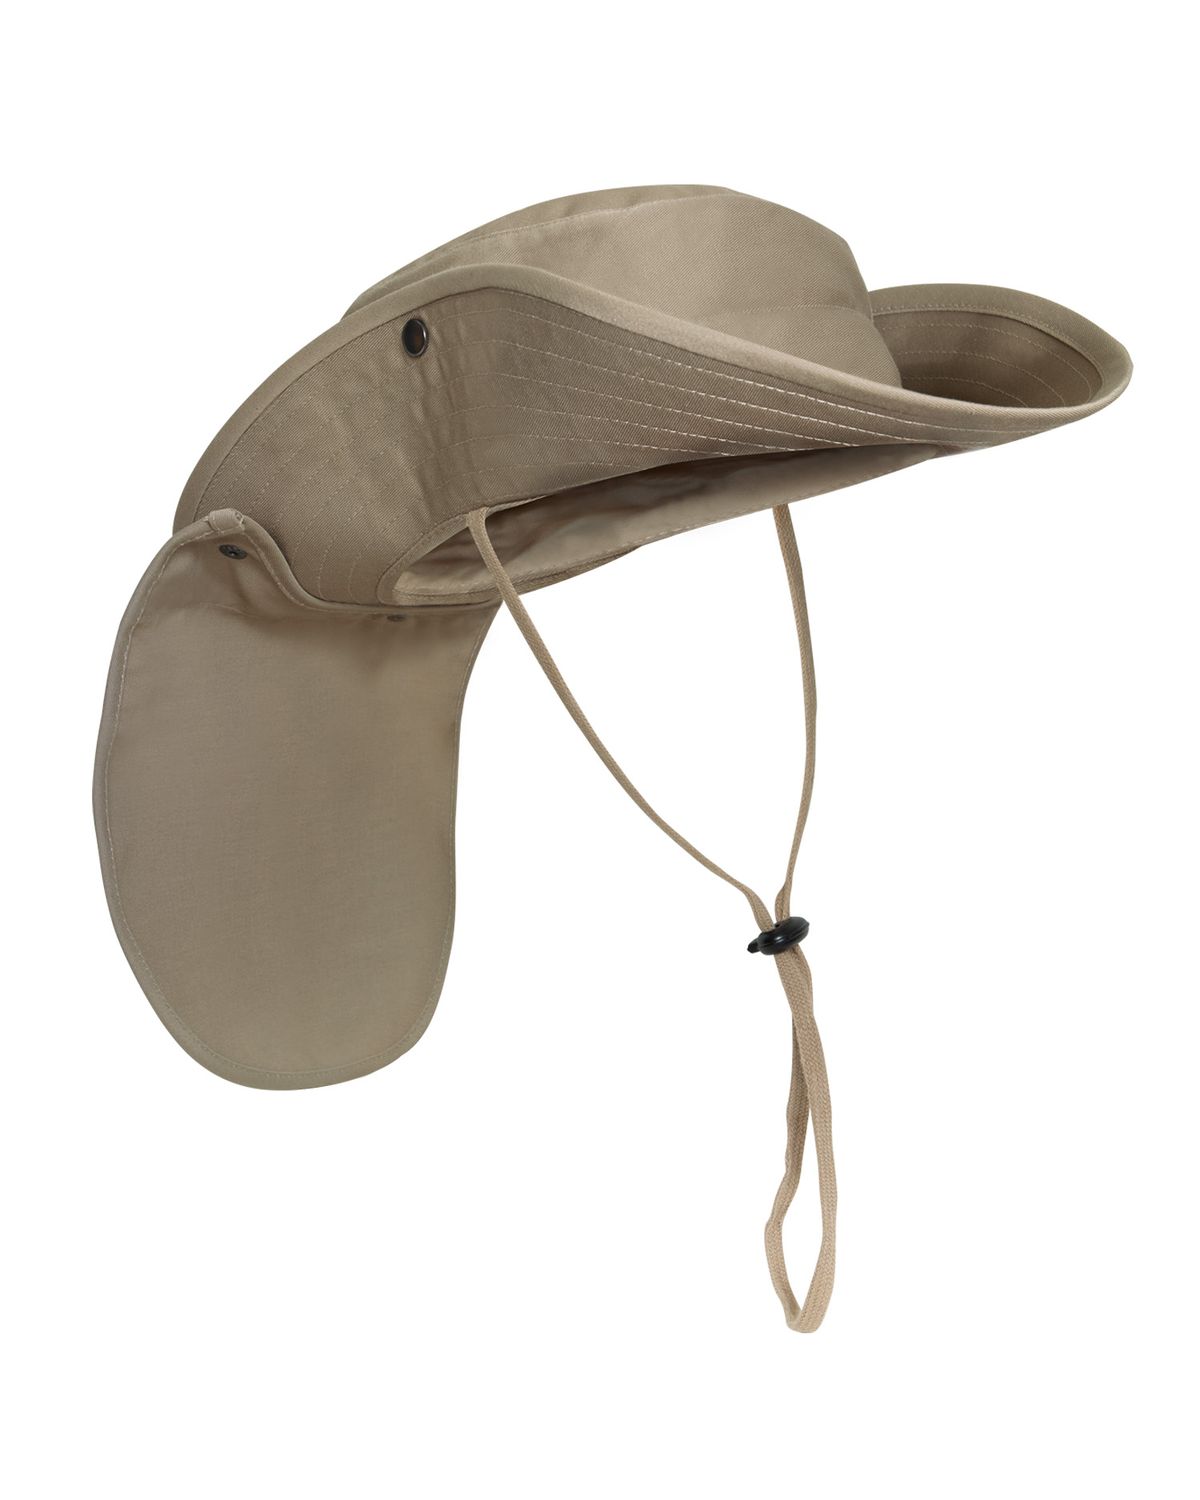 Rothco 5906 Rothco adjustable boonie hat with neck cover